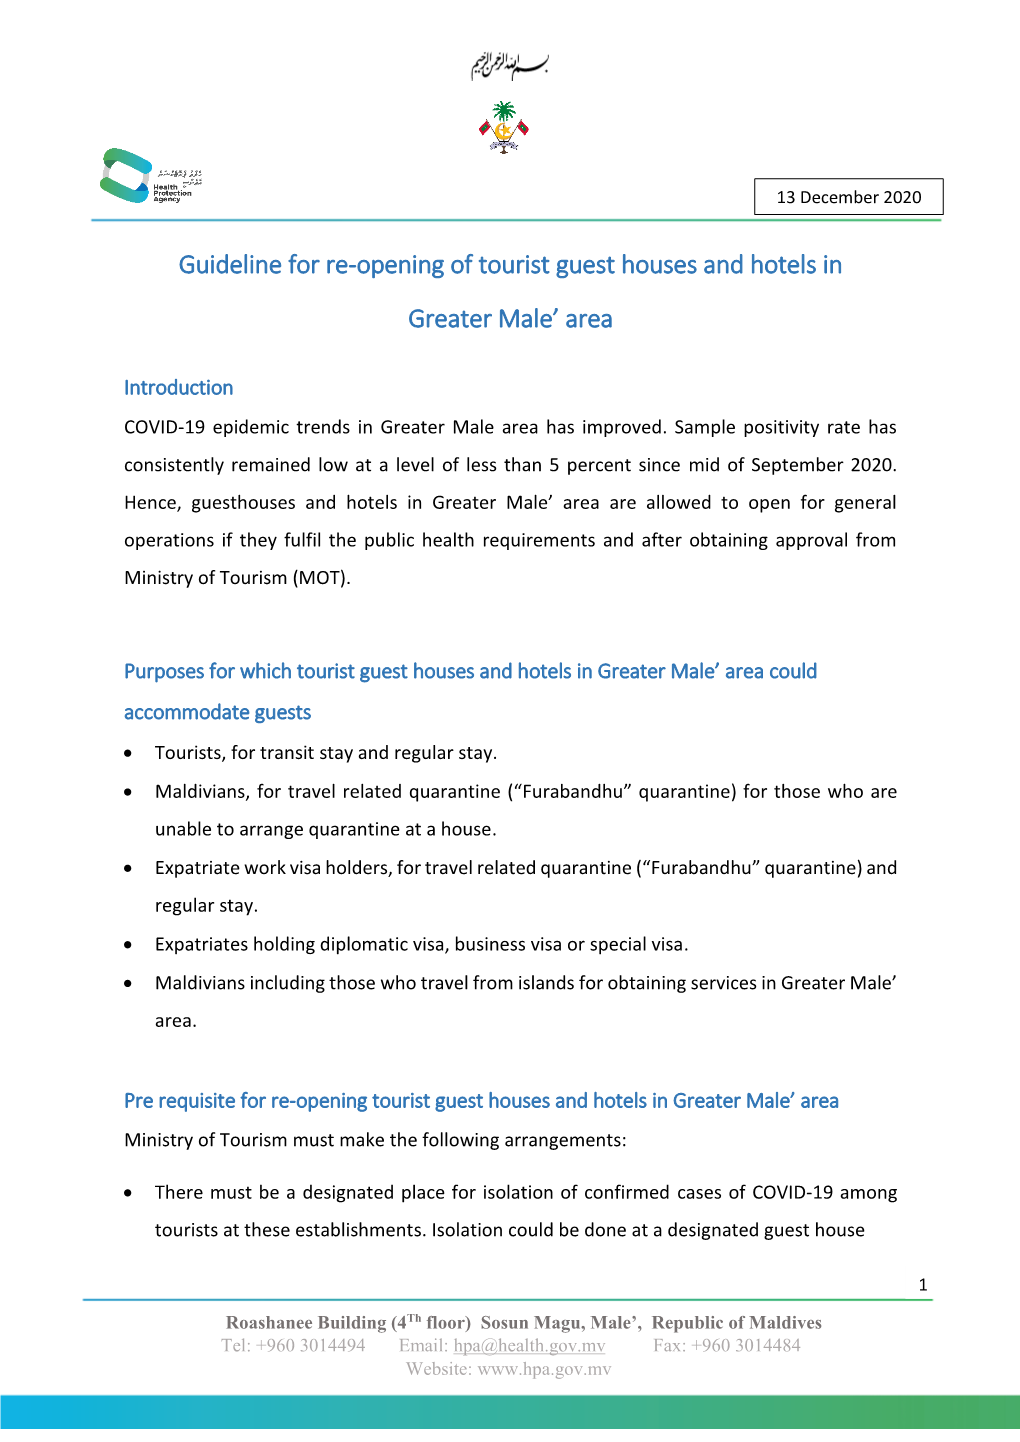 Guideline for Re-Opening of Tourist Guest Houses and Hotels in Greater Male’ Area